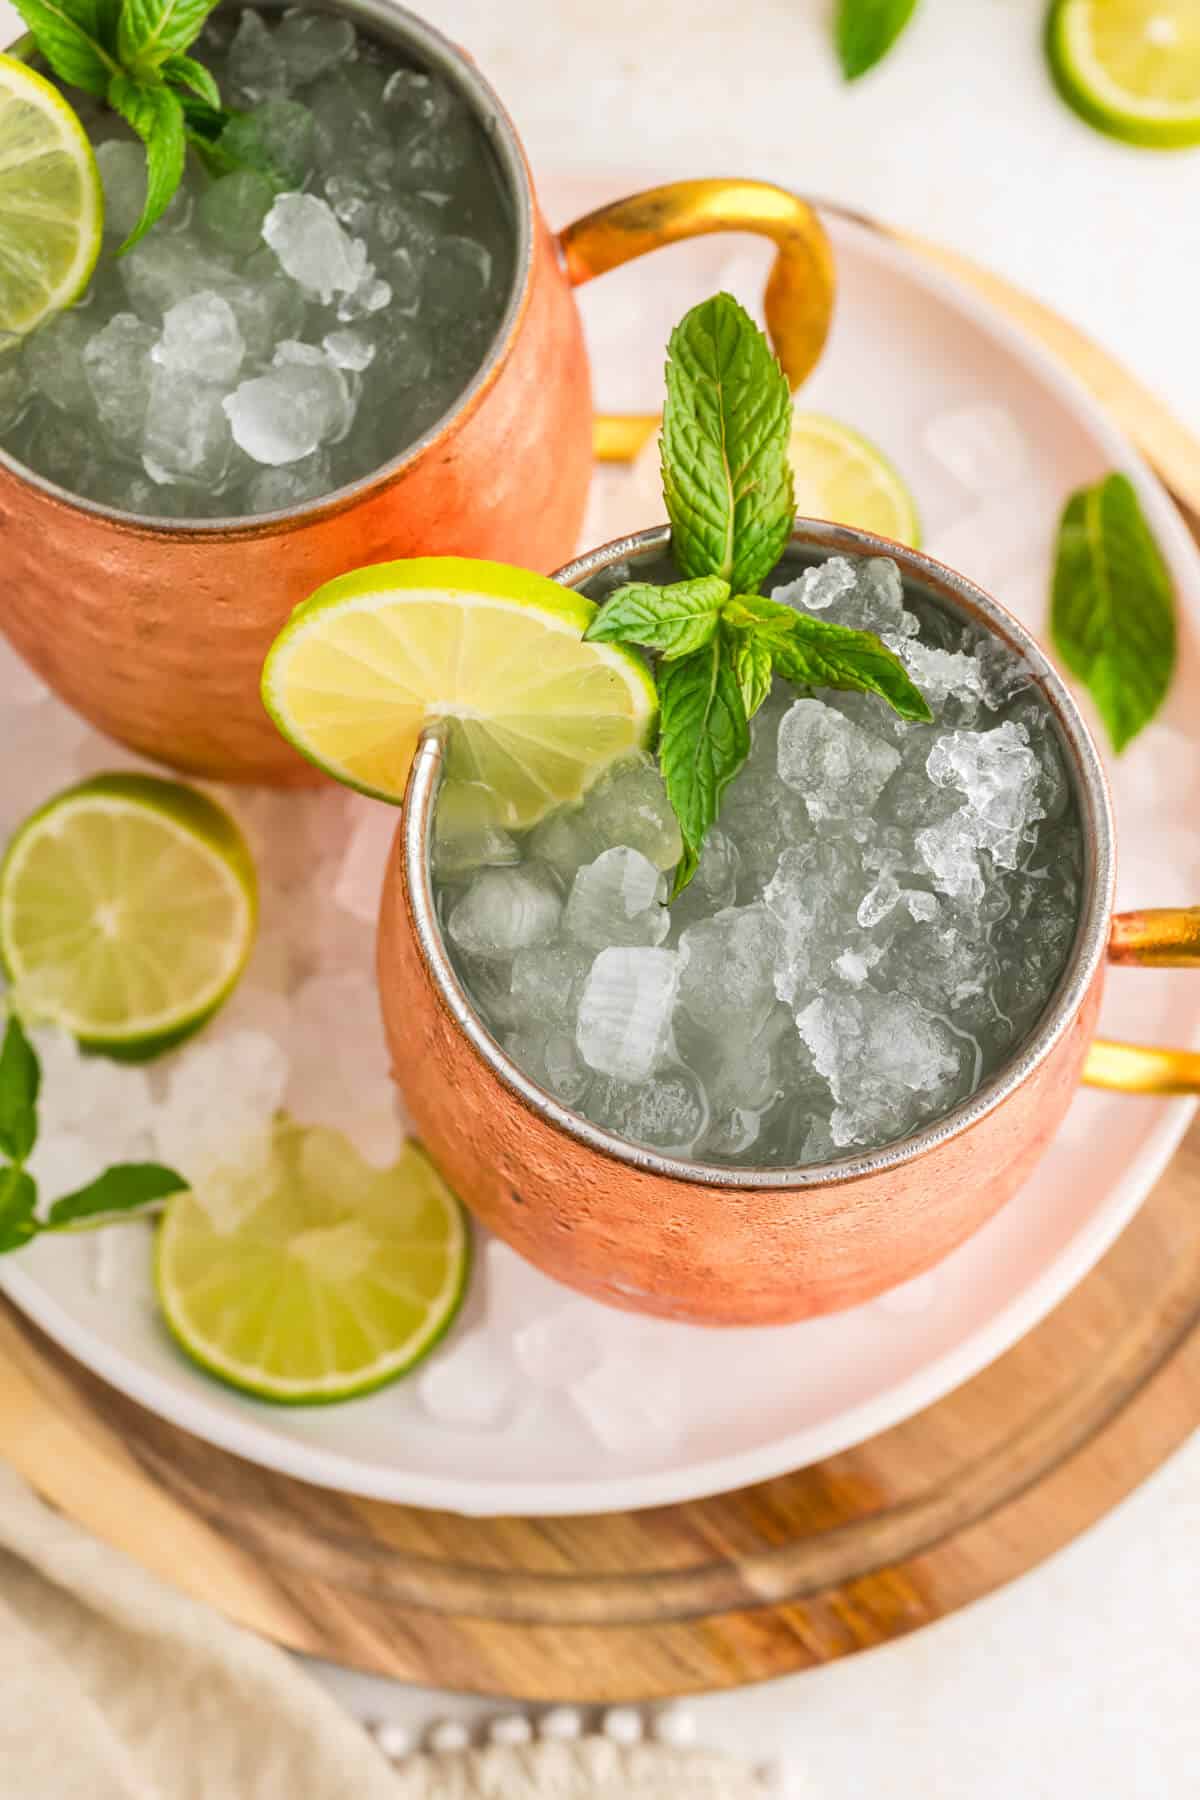 Top view of 2 Moscow Mules in copper mugs garnished with lime slices and fresh mint. Mugs are on a round serving platter.